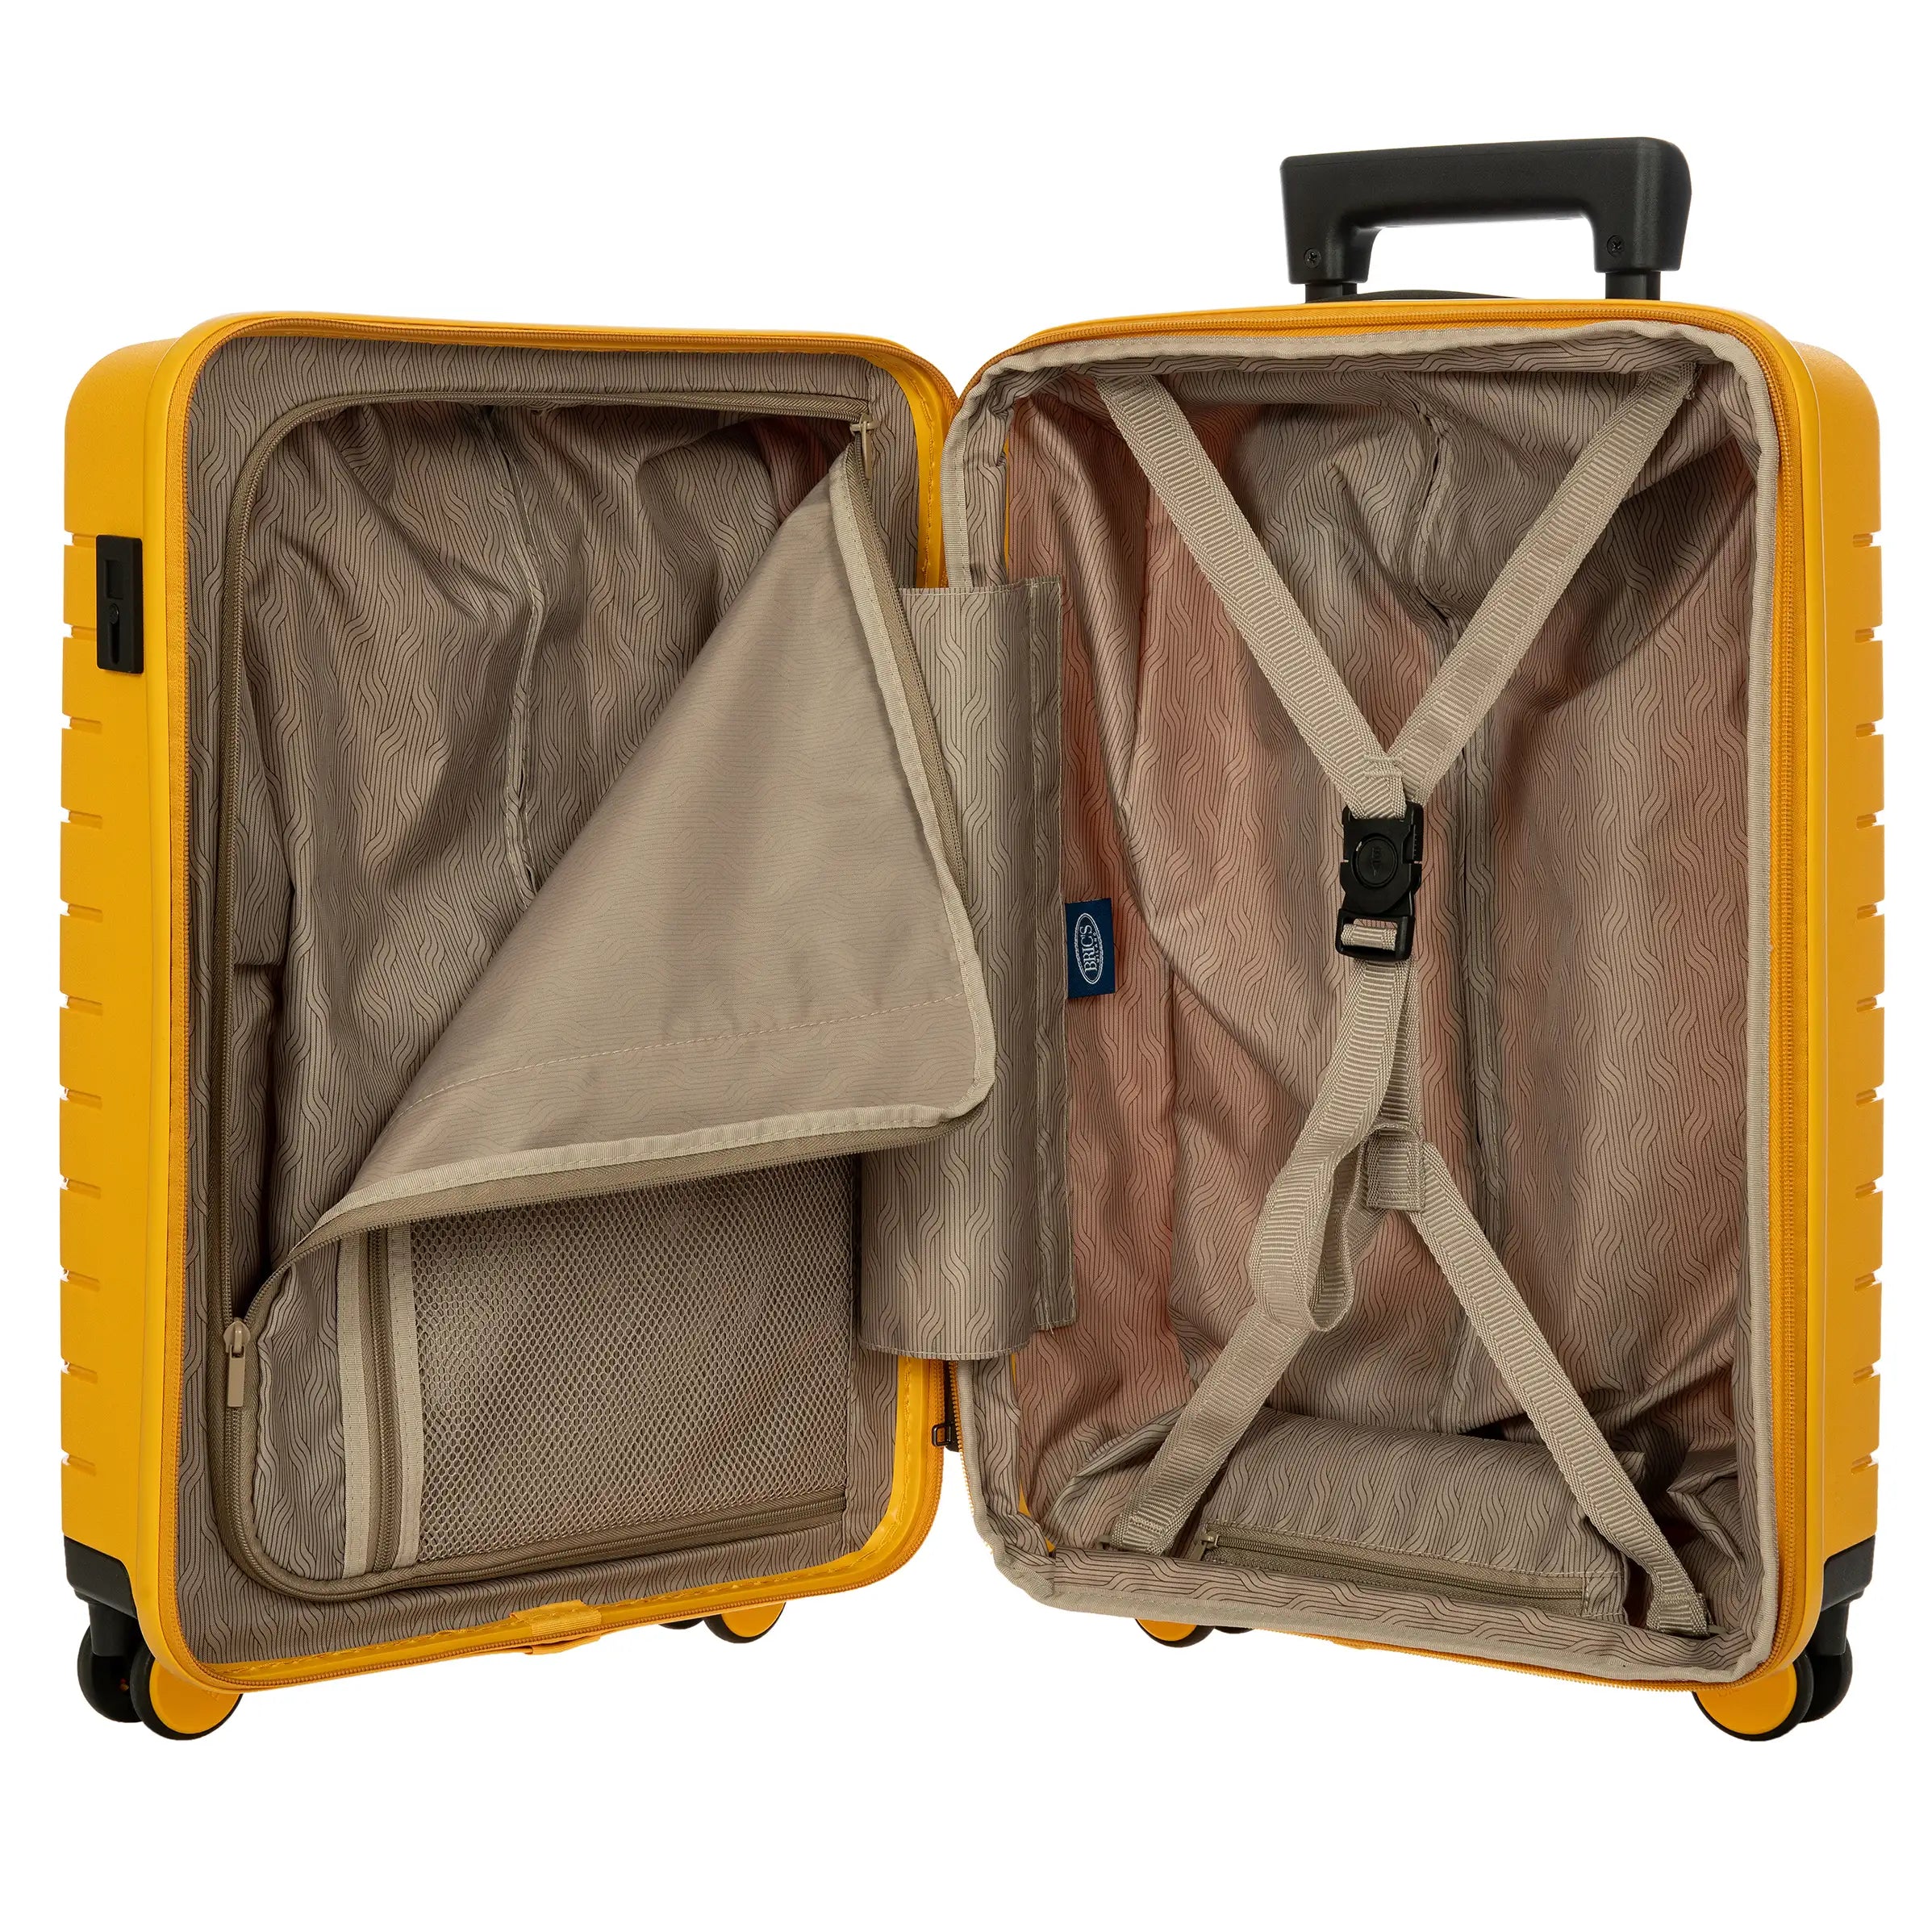 Valise cabine 4 roues By by Brics Ulisse avec poche frontale 55 cm - Mangue